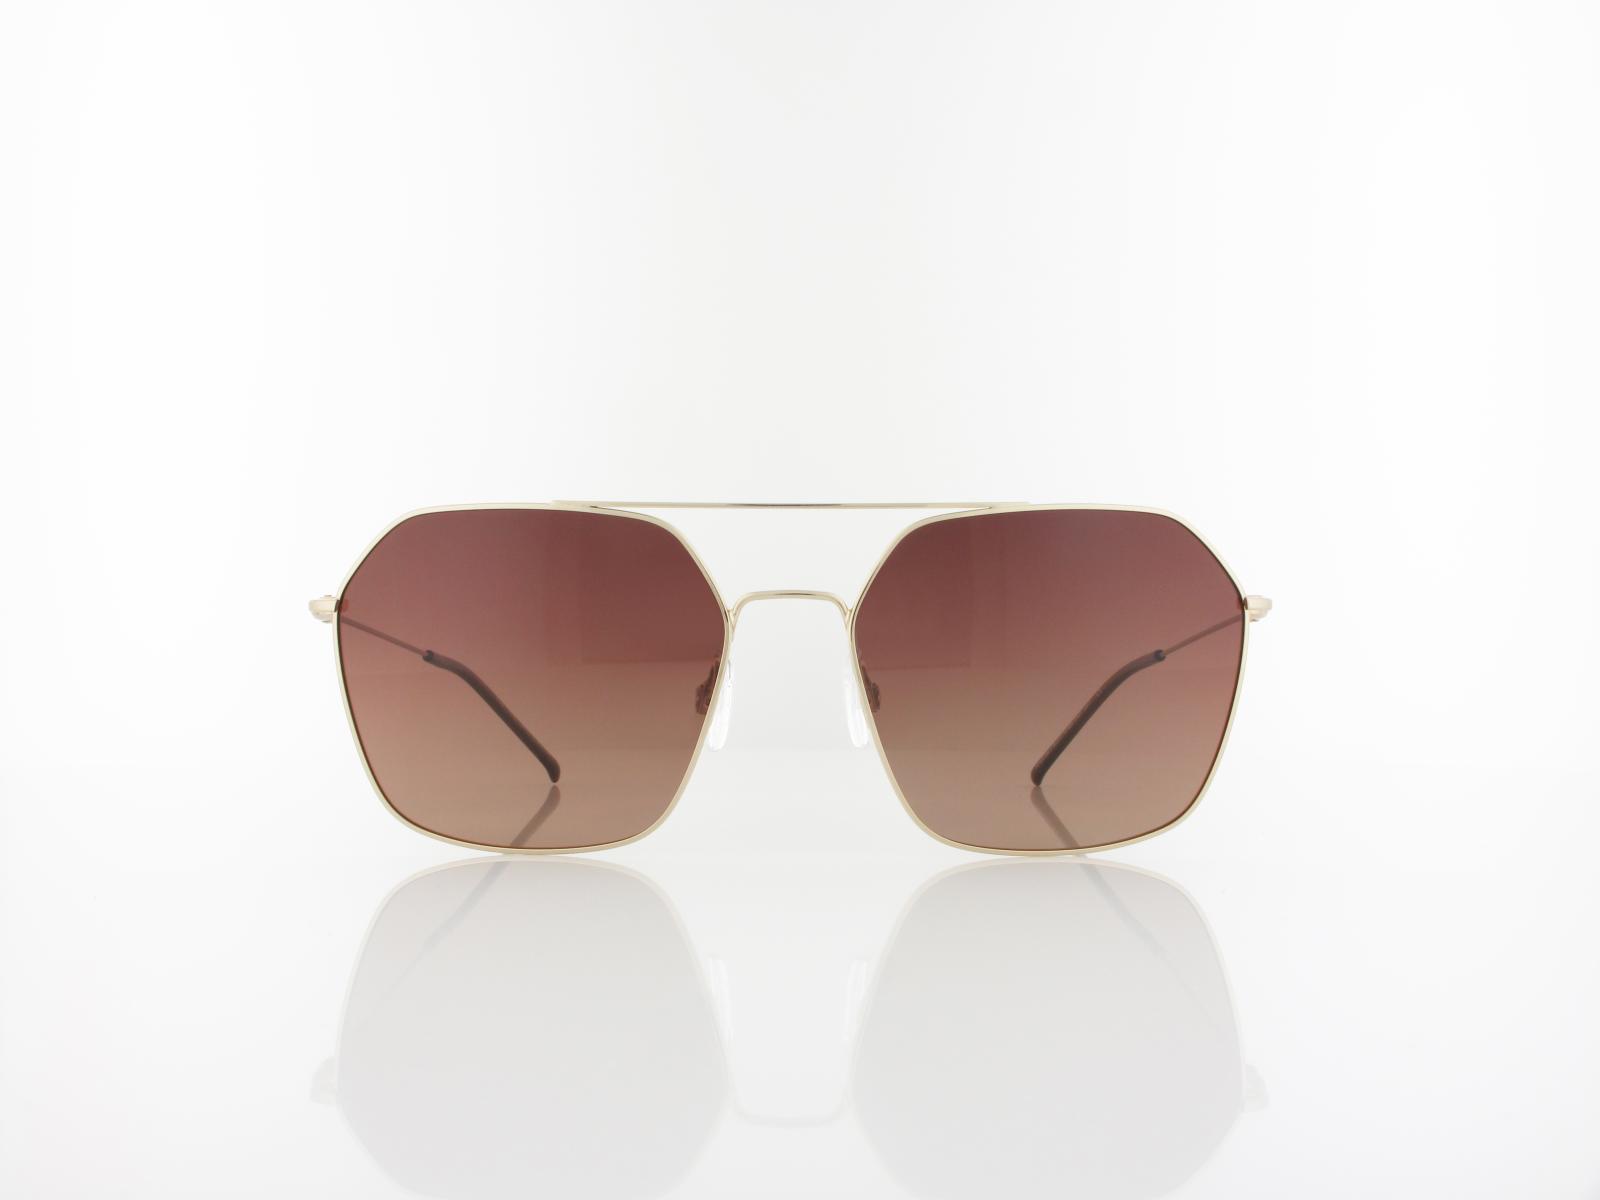 HIS polarized | HPS24104-1 59 | gold / brown gradient pol